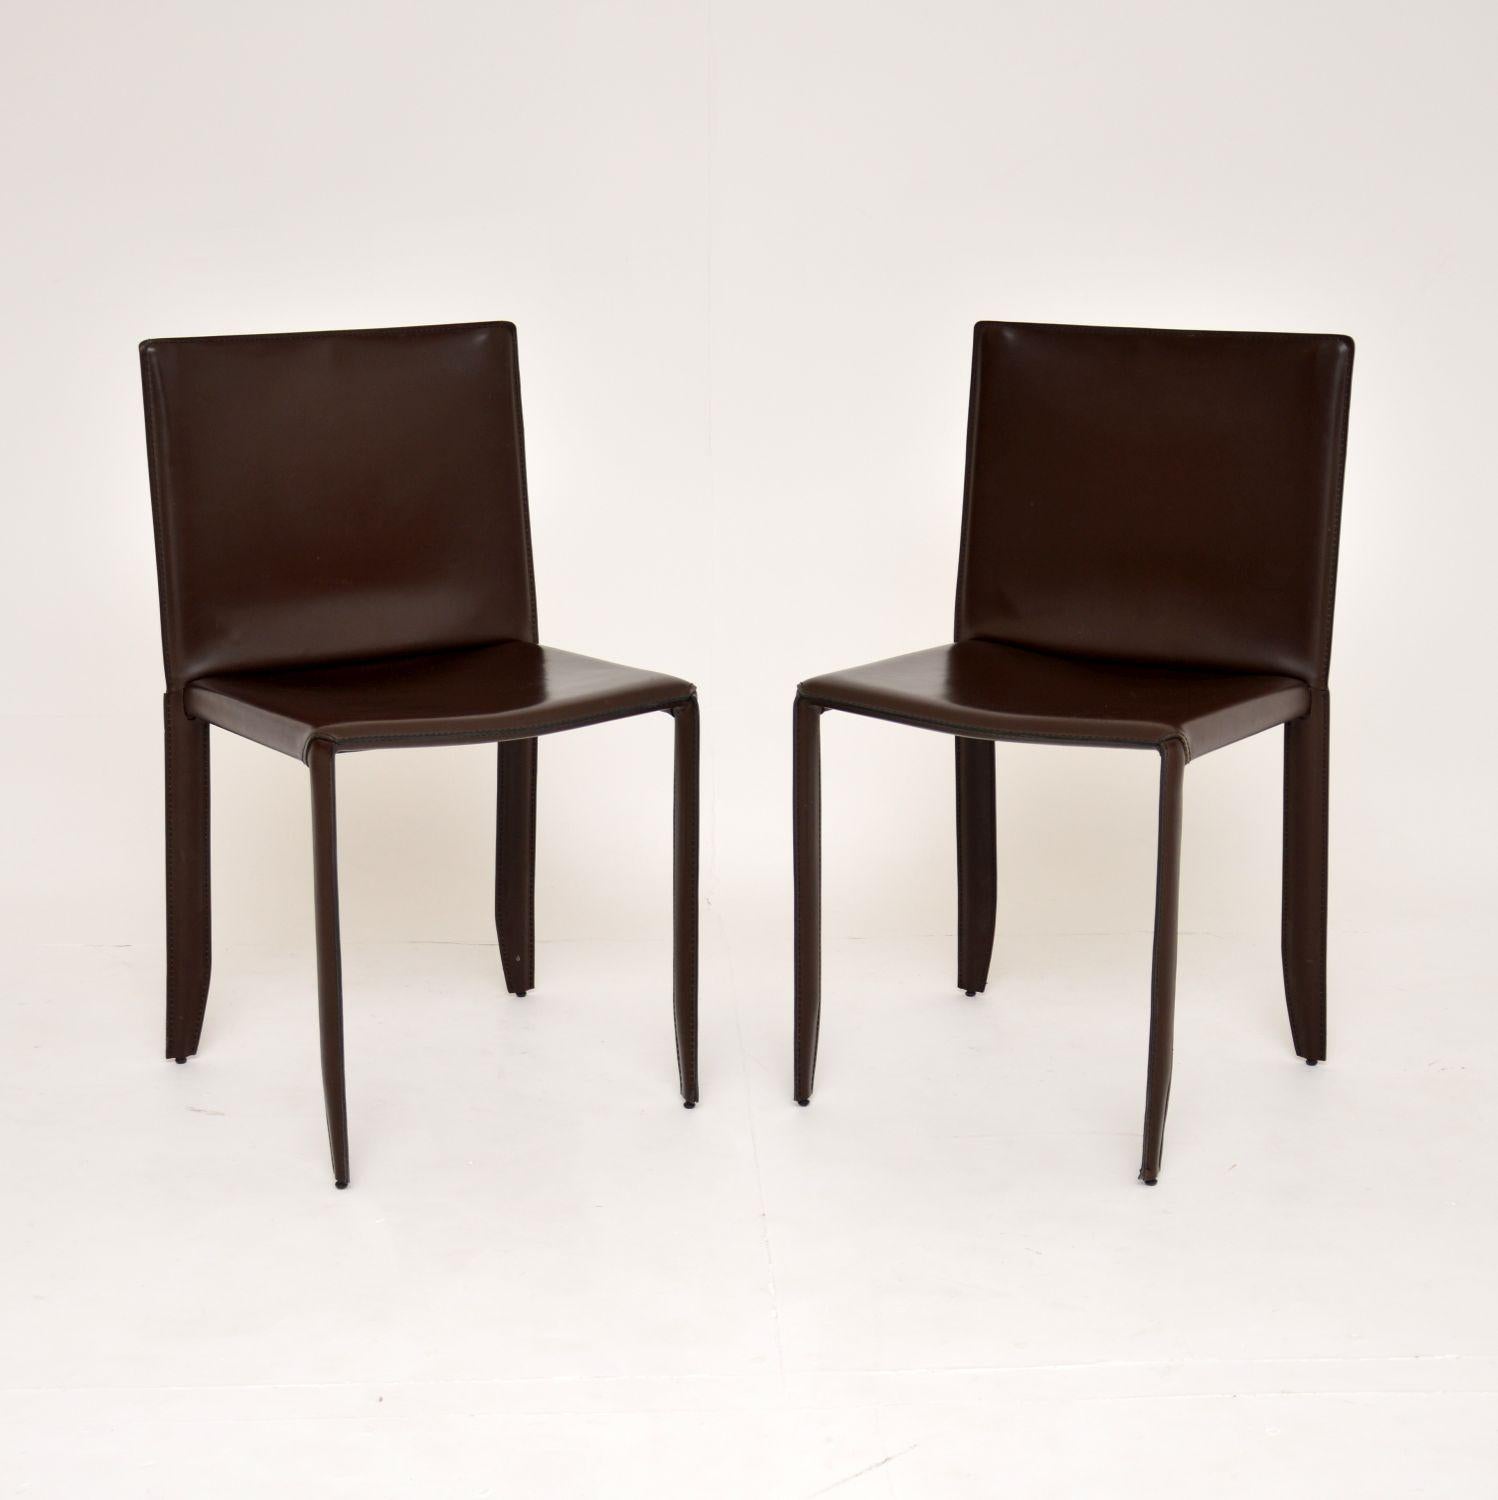 A stylish and extremely fine quality pair of modernist side chairs in leather. These were made in the late 20th/early 21st century by Catellan Italia.

Very expensive to buy new, this slightly older pair are beautifully made with steel frames